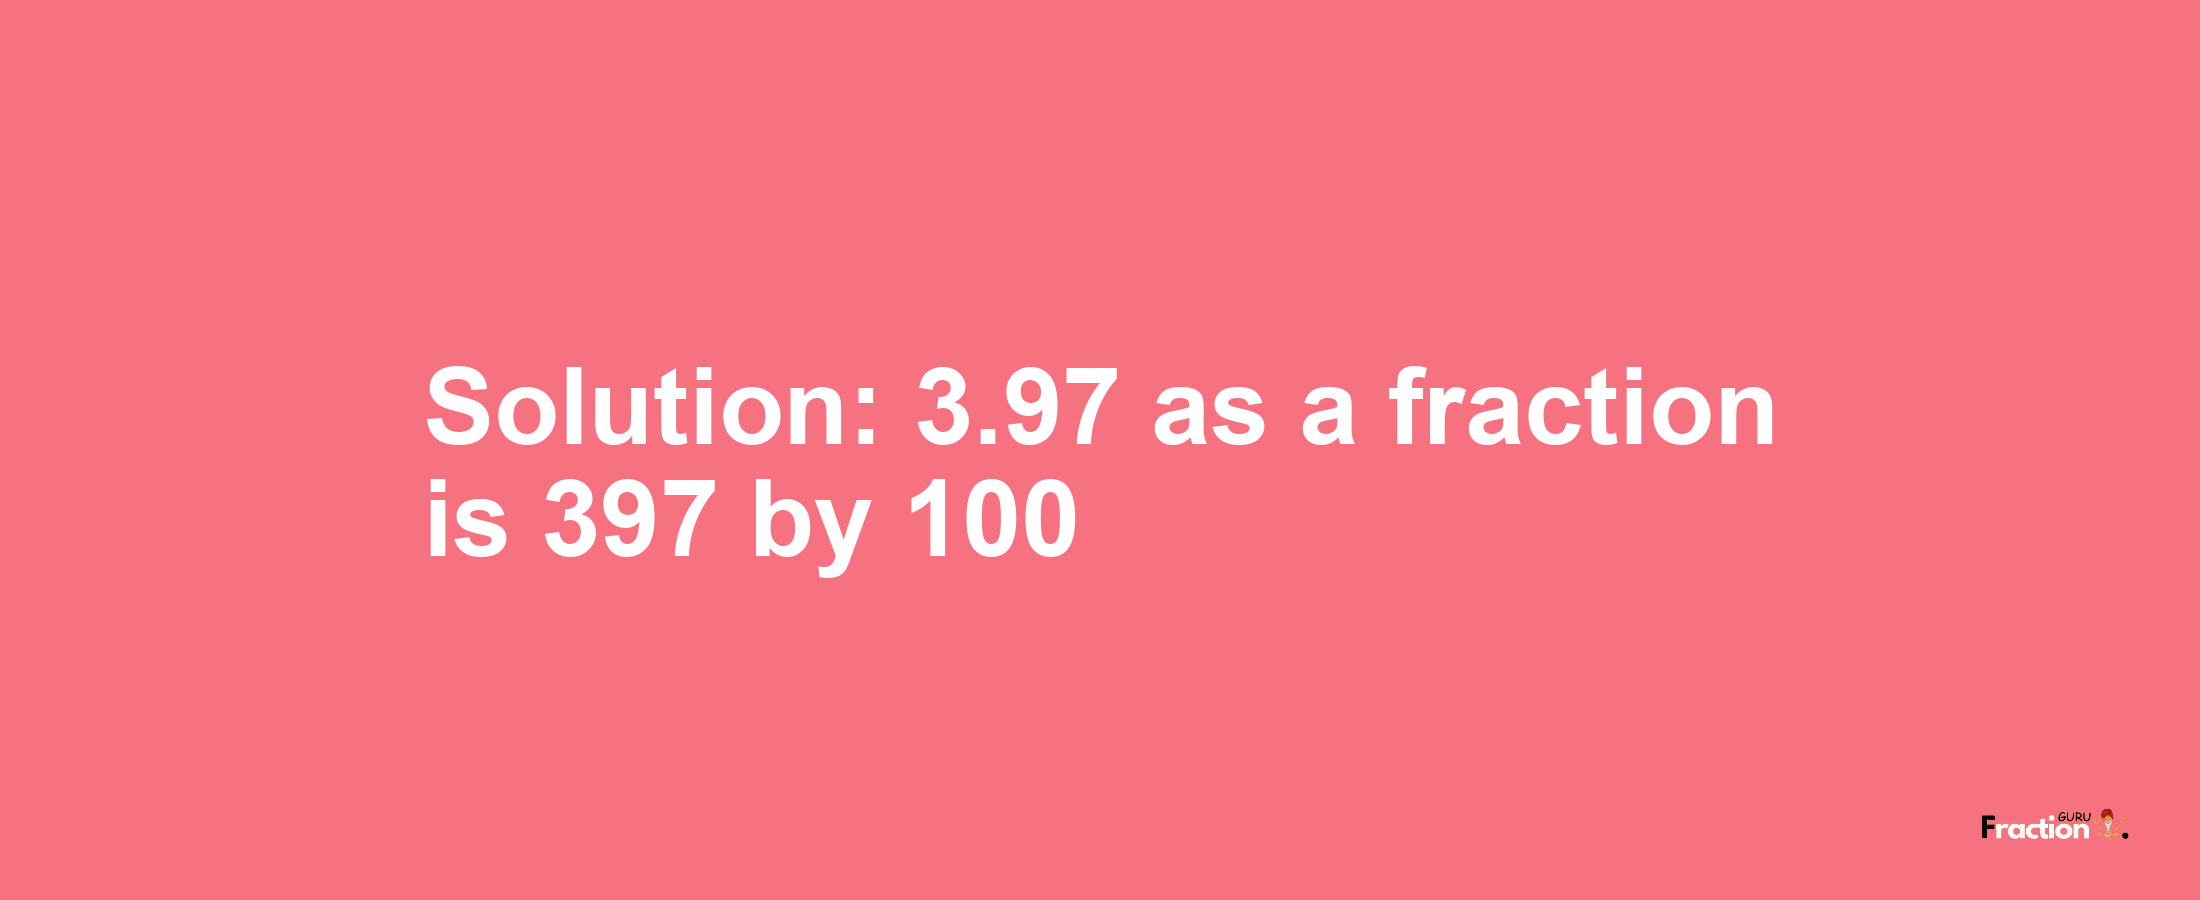 Solution:3.97 as a fraction is 397/100